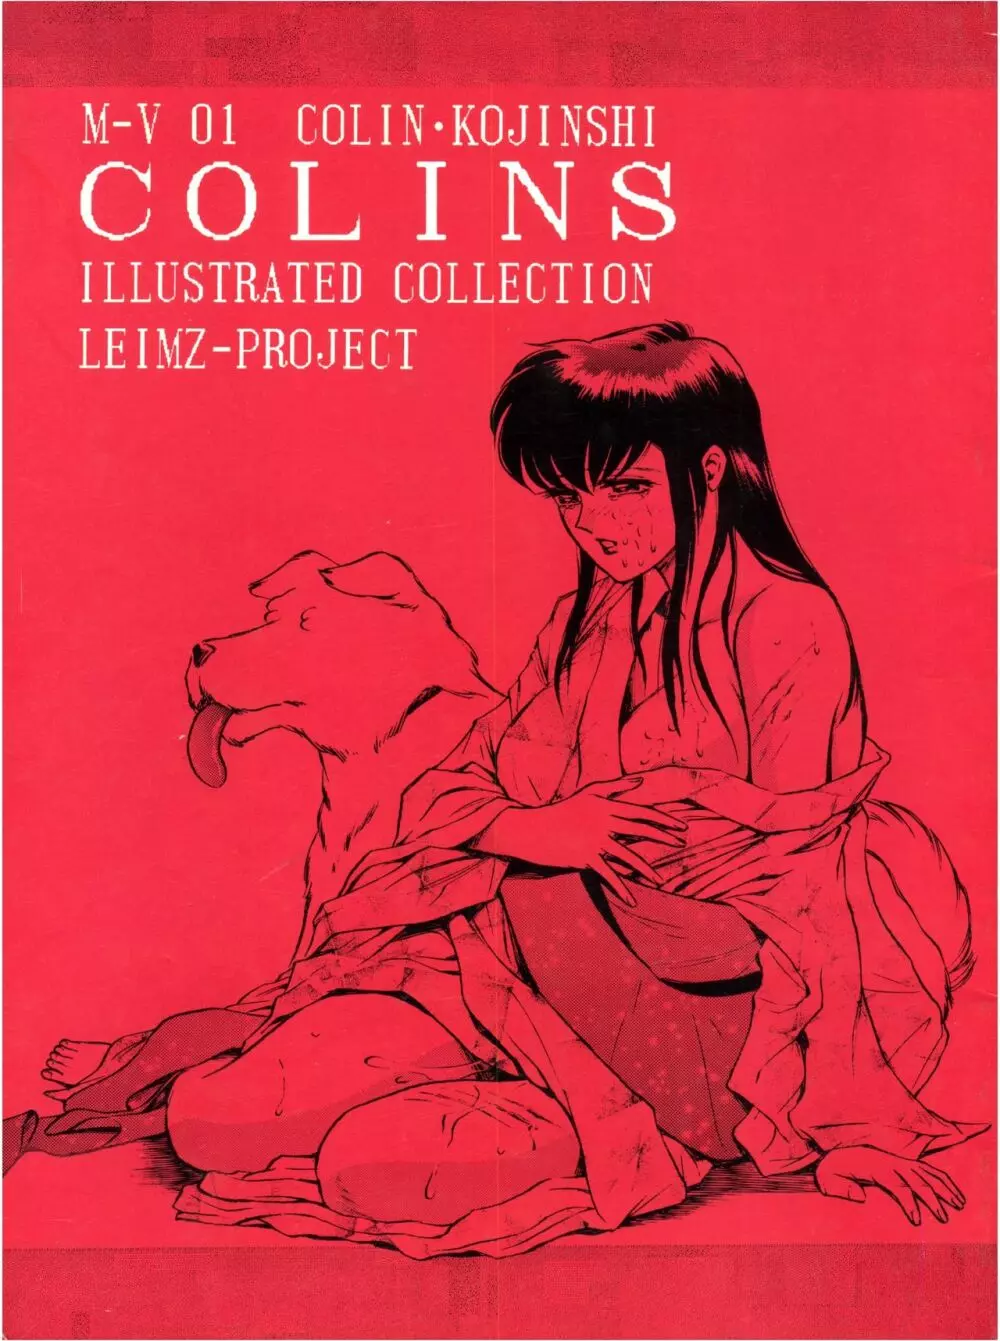 COLINS ILLUSTRATED COLLECTION